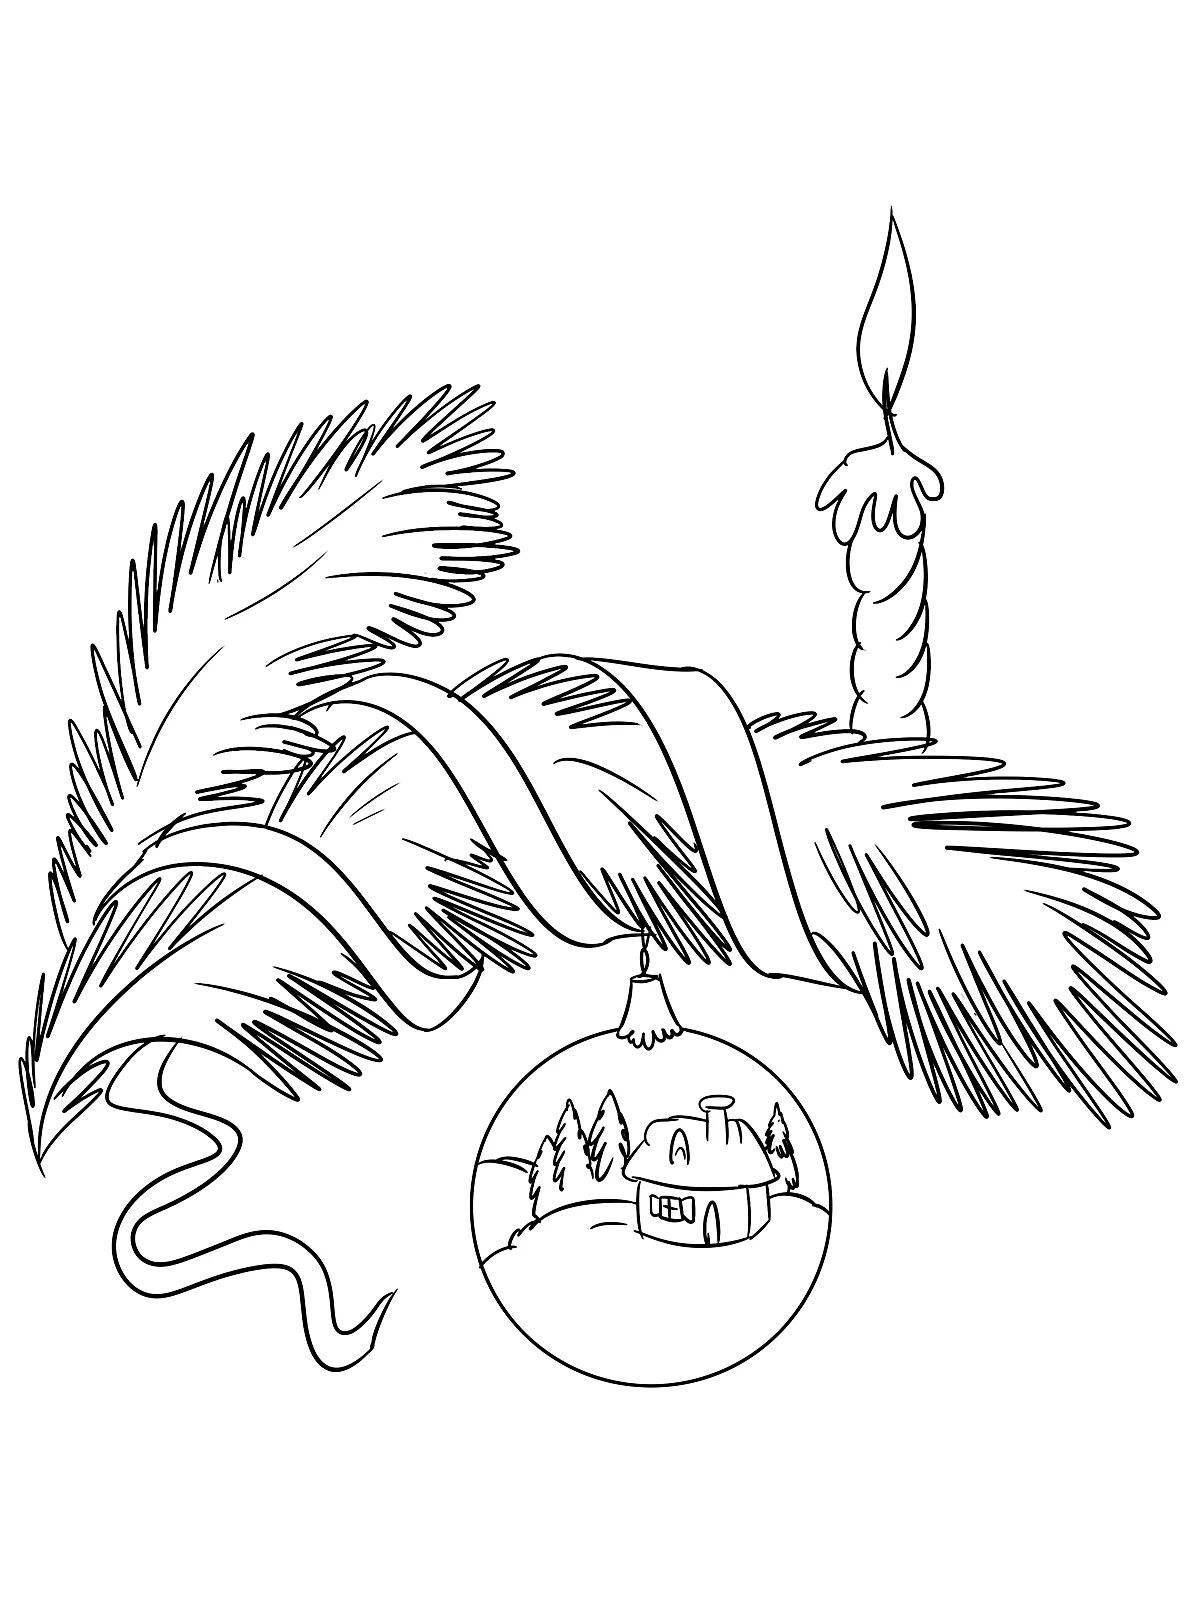 Coloring page shining Christmas tree branch